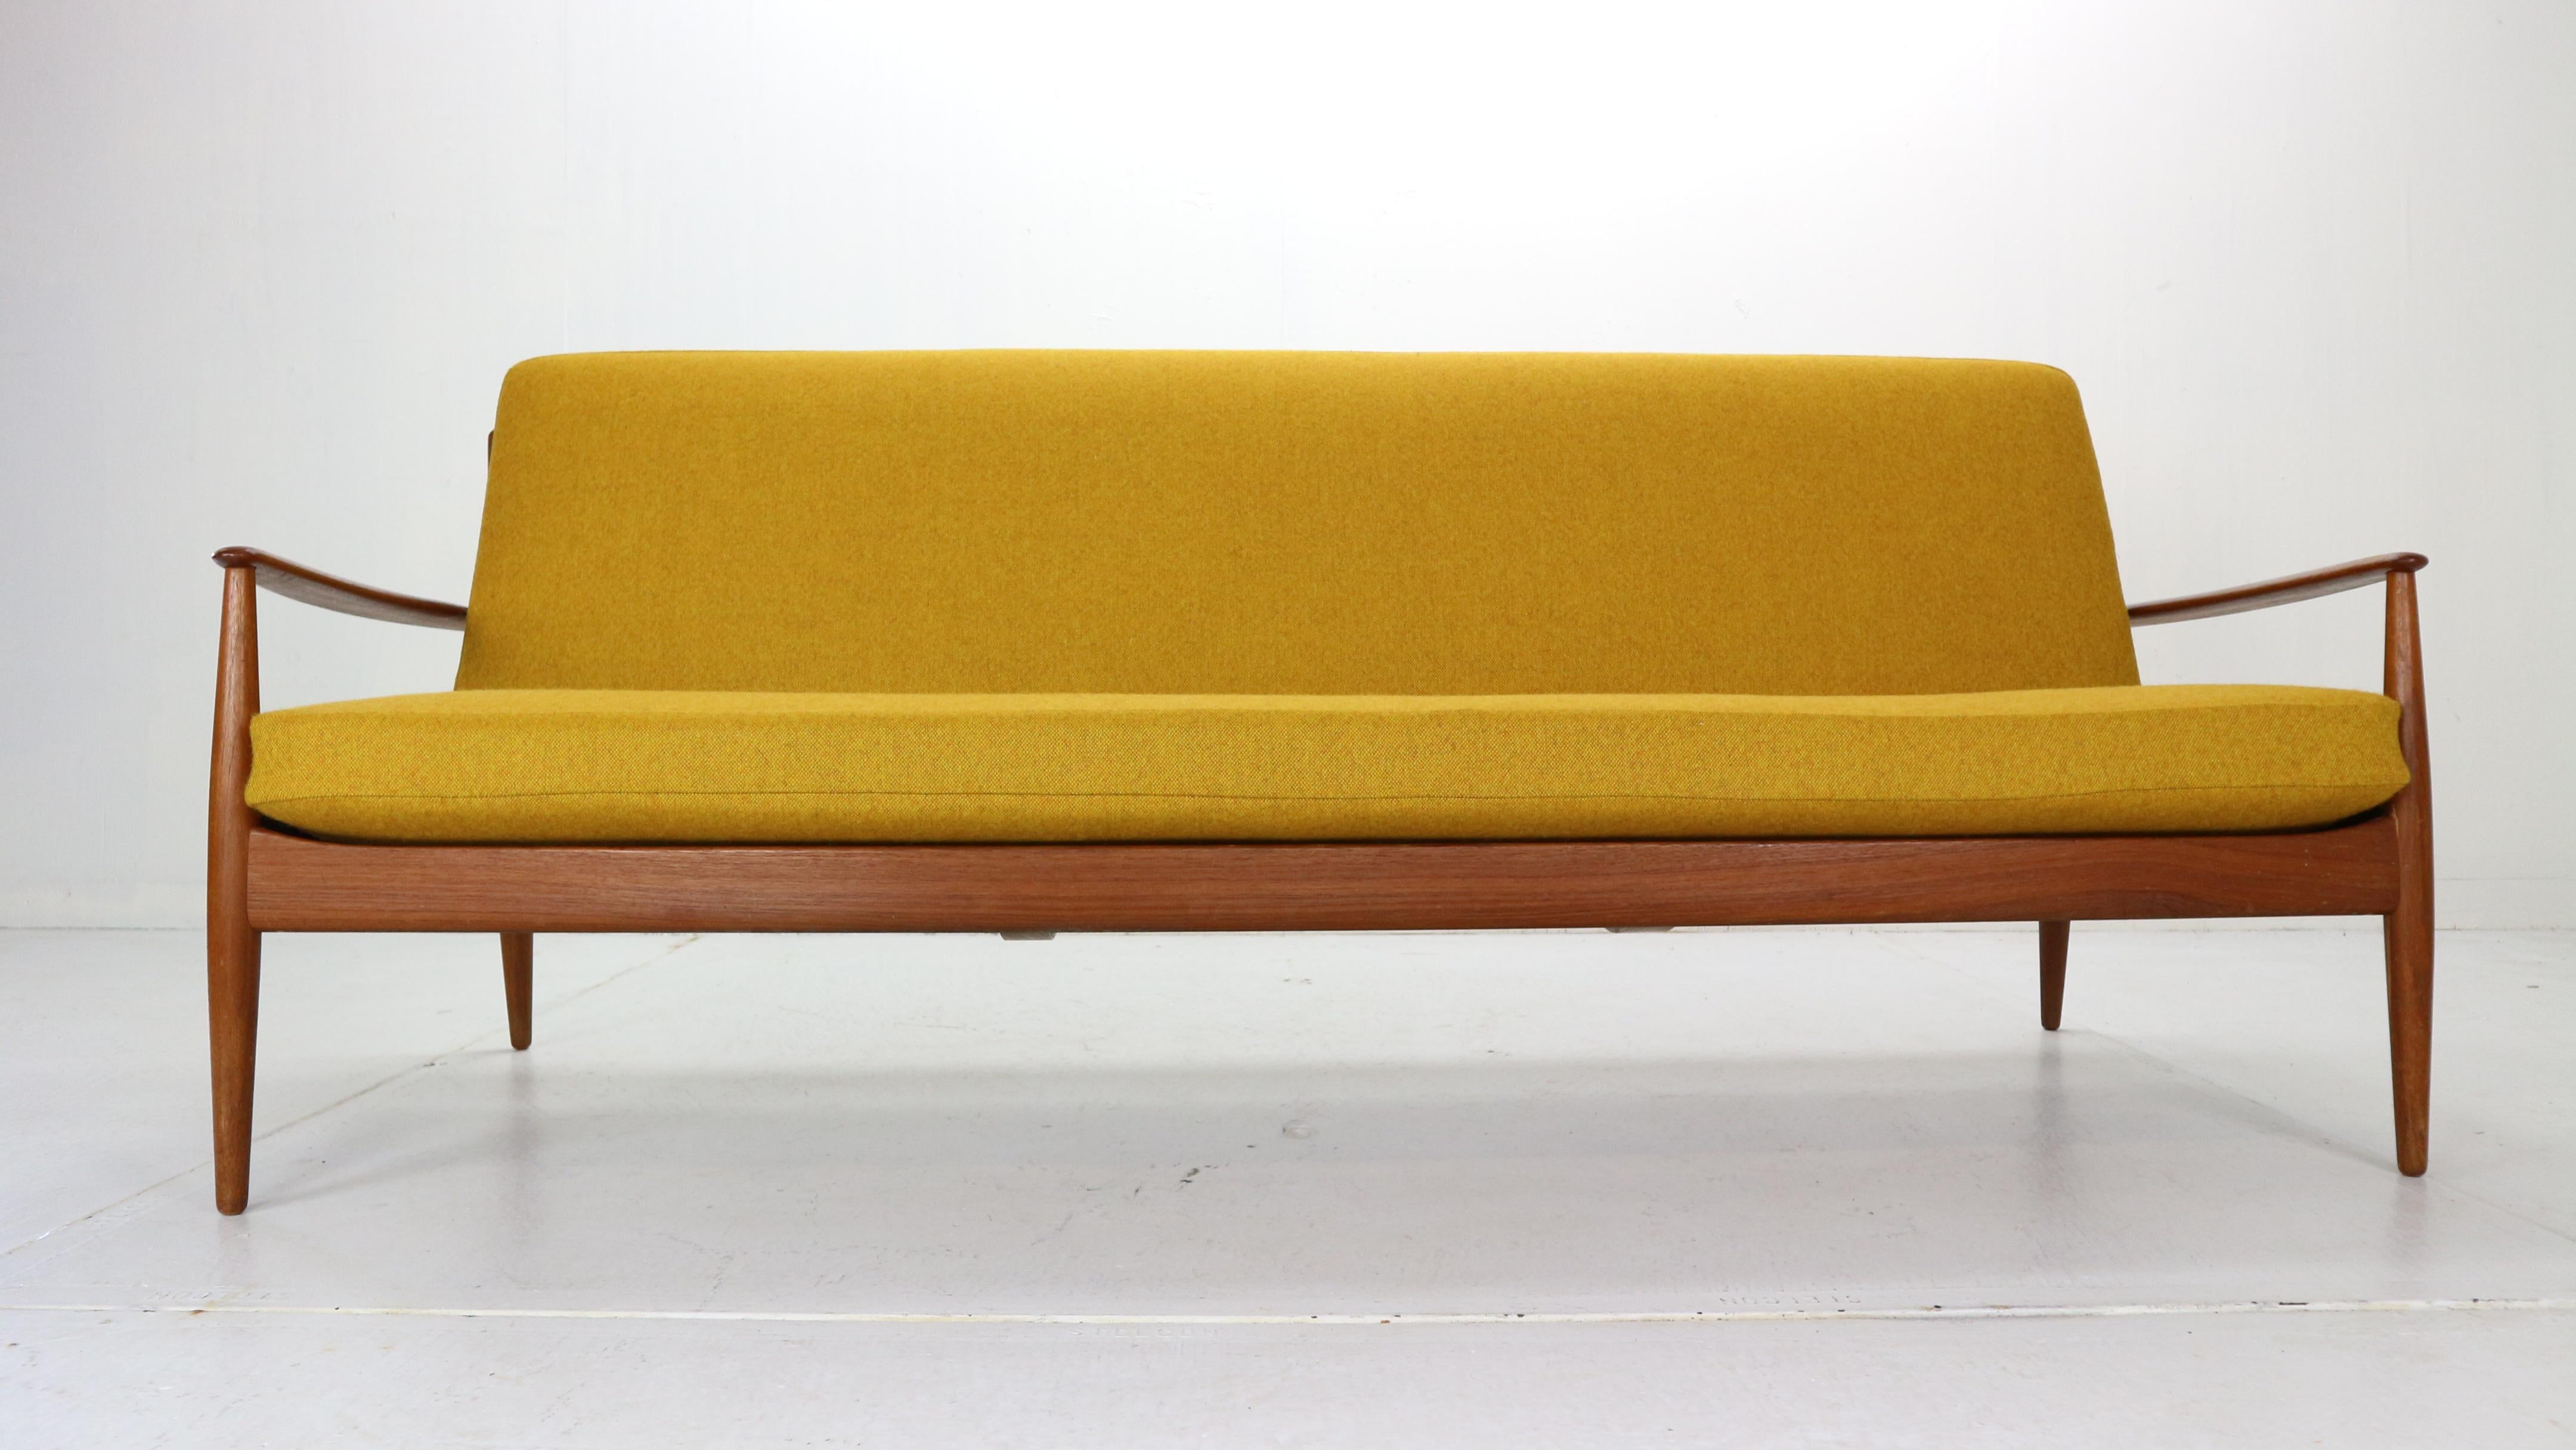 Scandinavian Modern design three-seat sofa designed by Grete Jalk and manufactured for France & Son in 1963, Denmark.

Sculpted frame, back and armrests are made from solid teak wood.
The yellow color seating and back rest has been newly